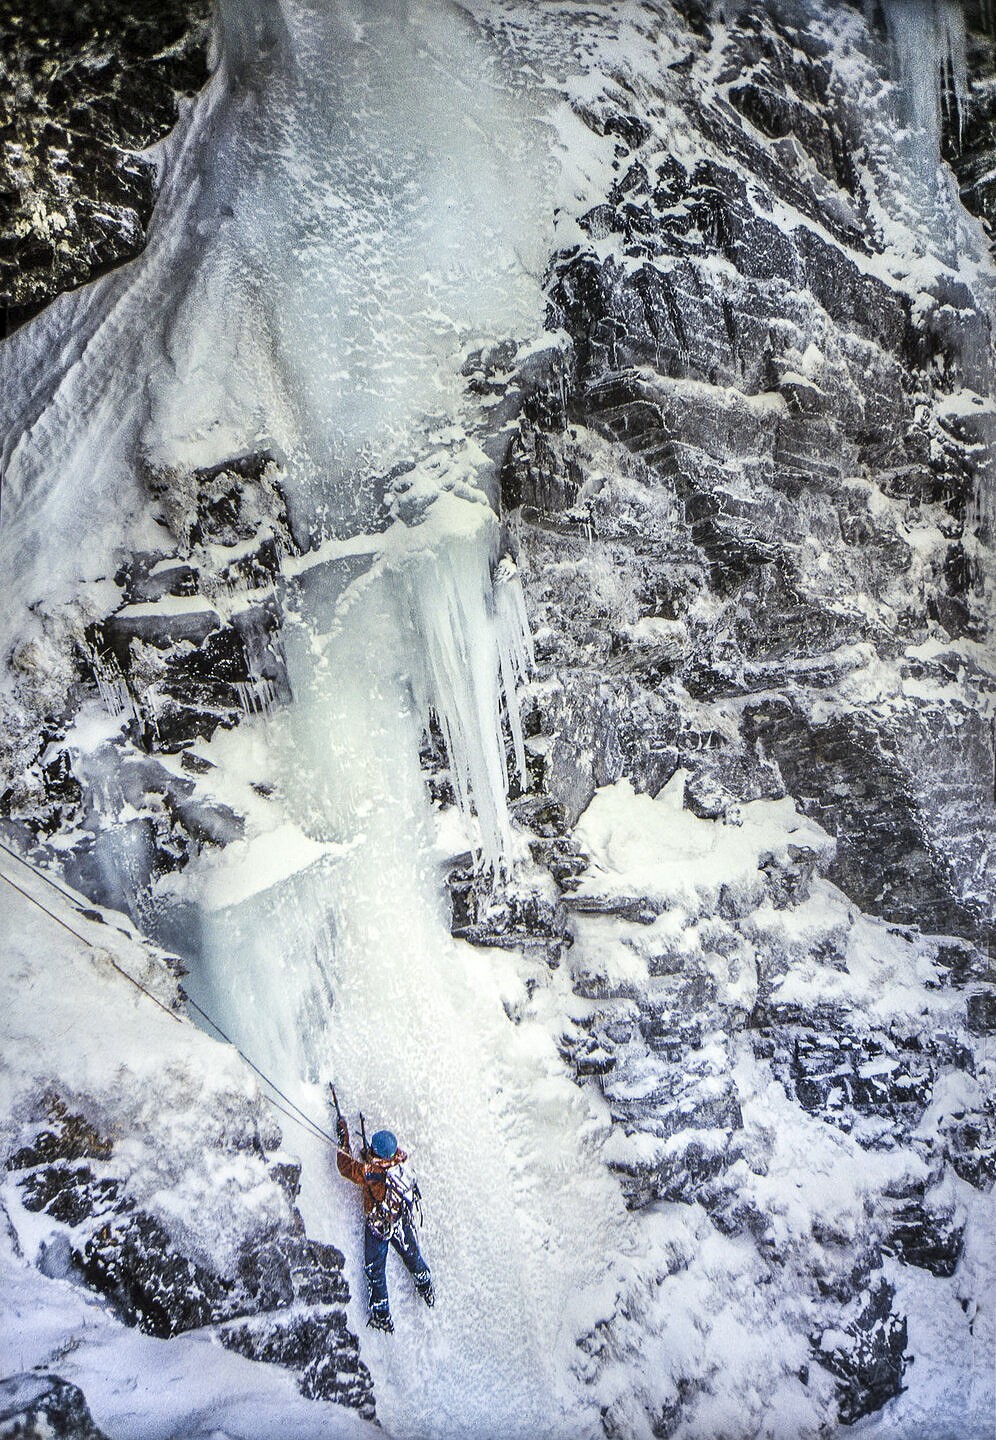 North Post ice falls in great condition.  © Removed User